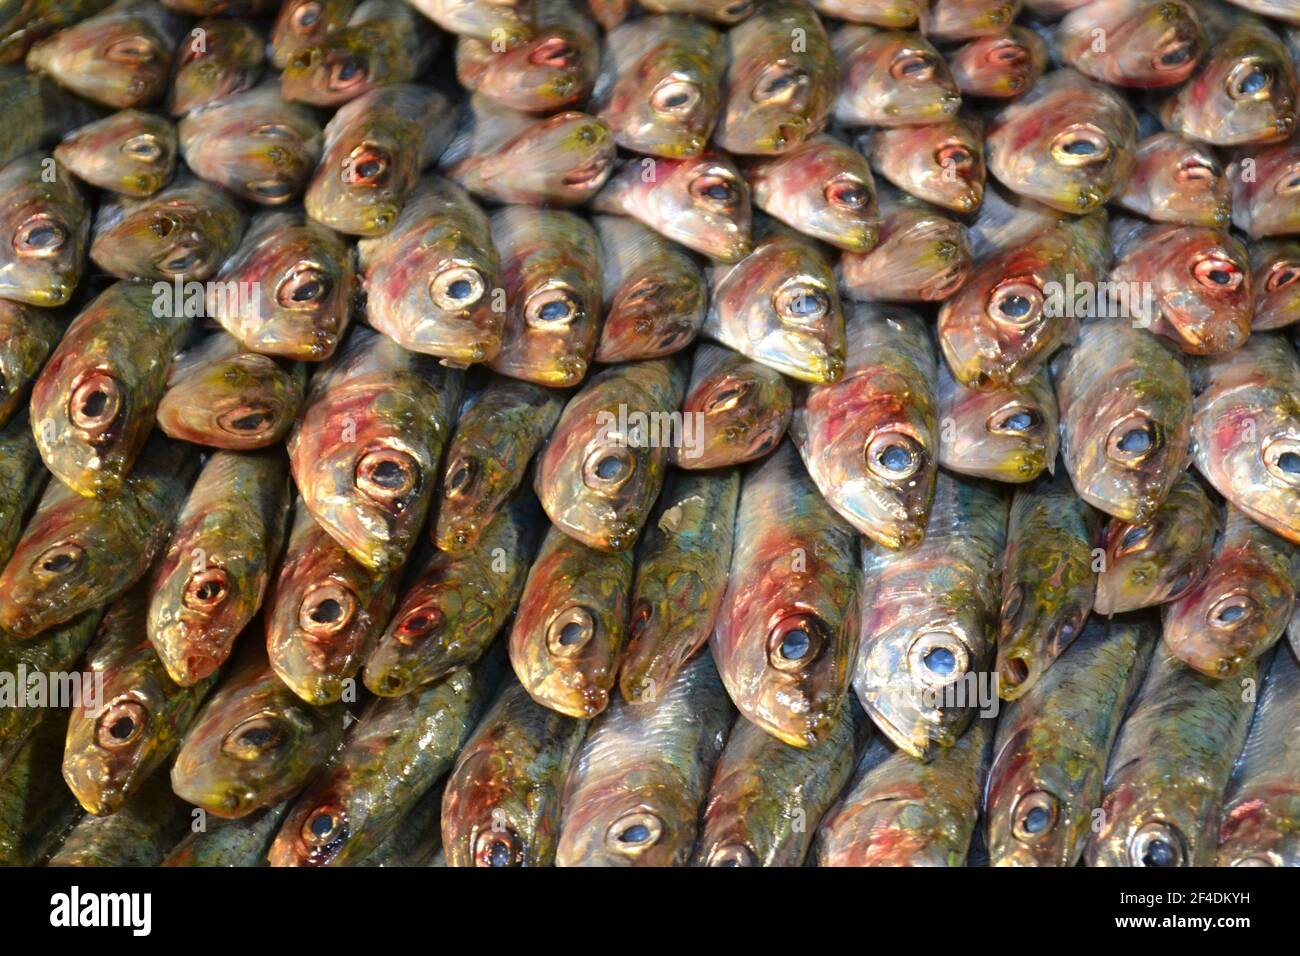 Close up view of fresh sardine heads in rows facing the camera. Stock Photo